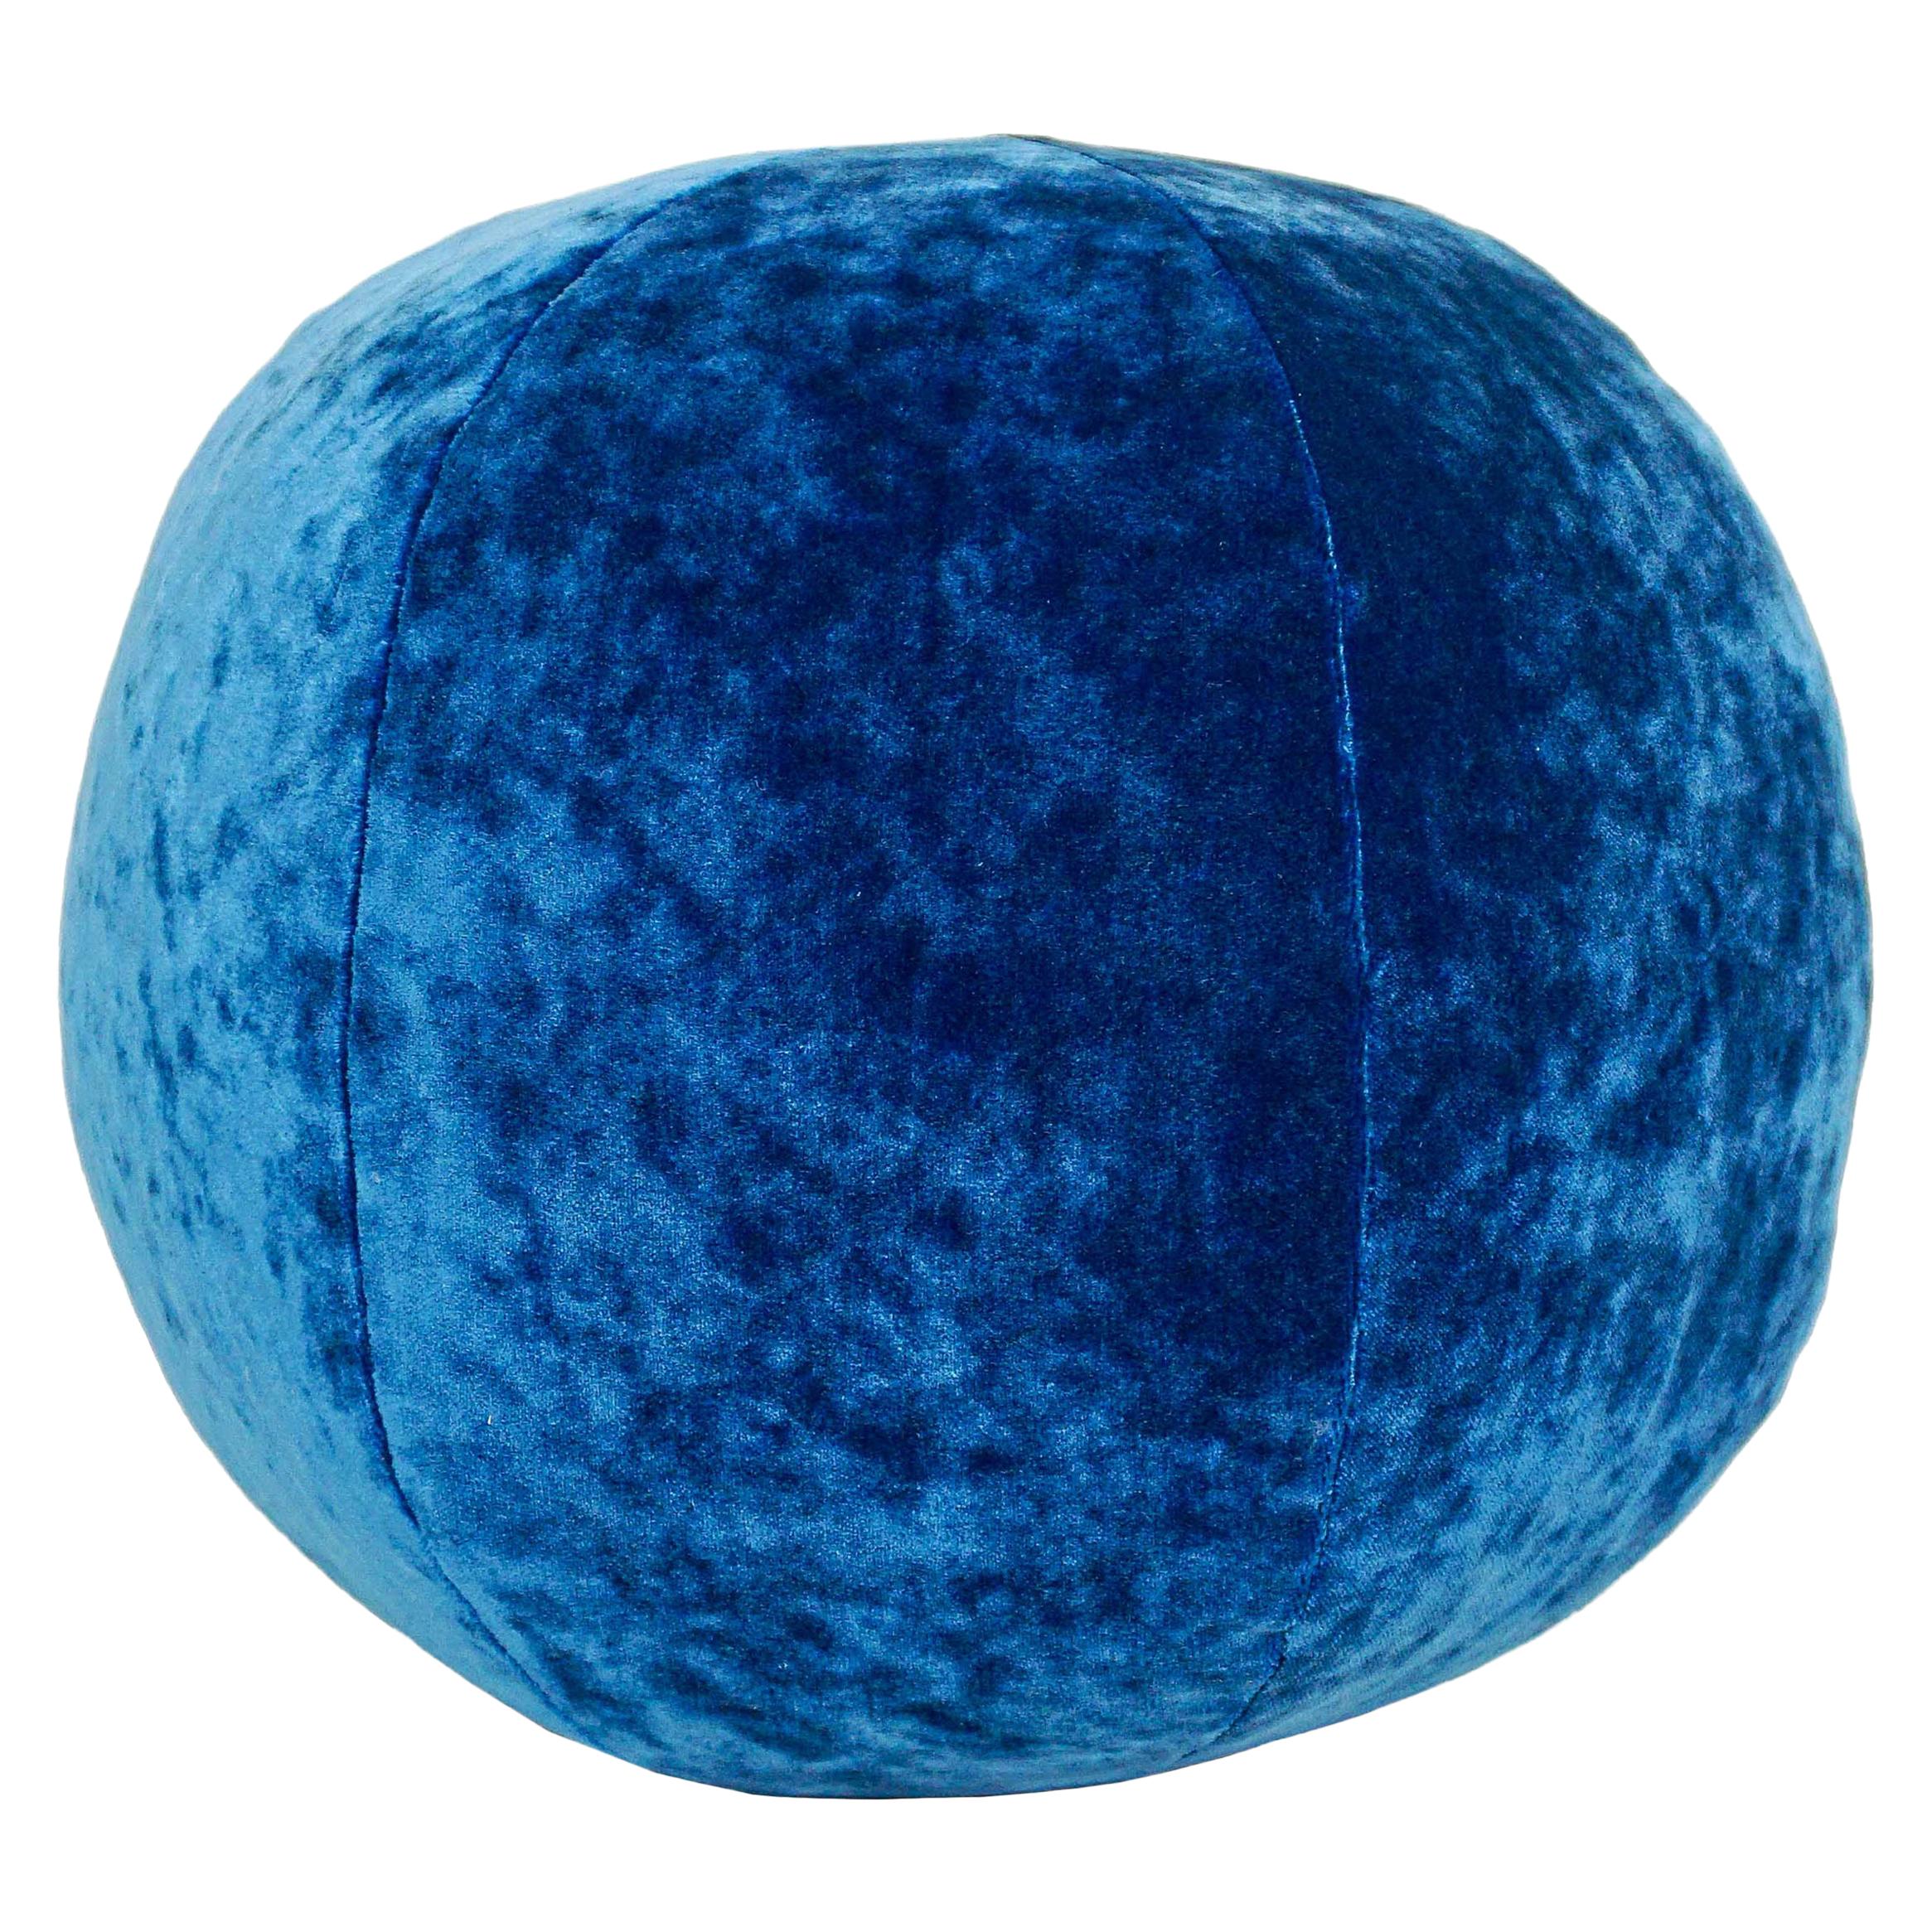 Electric Blue Crushed Velvet Ball Pillow For Sale